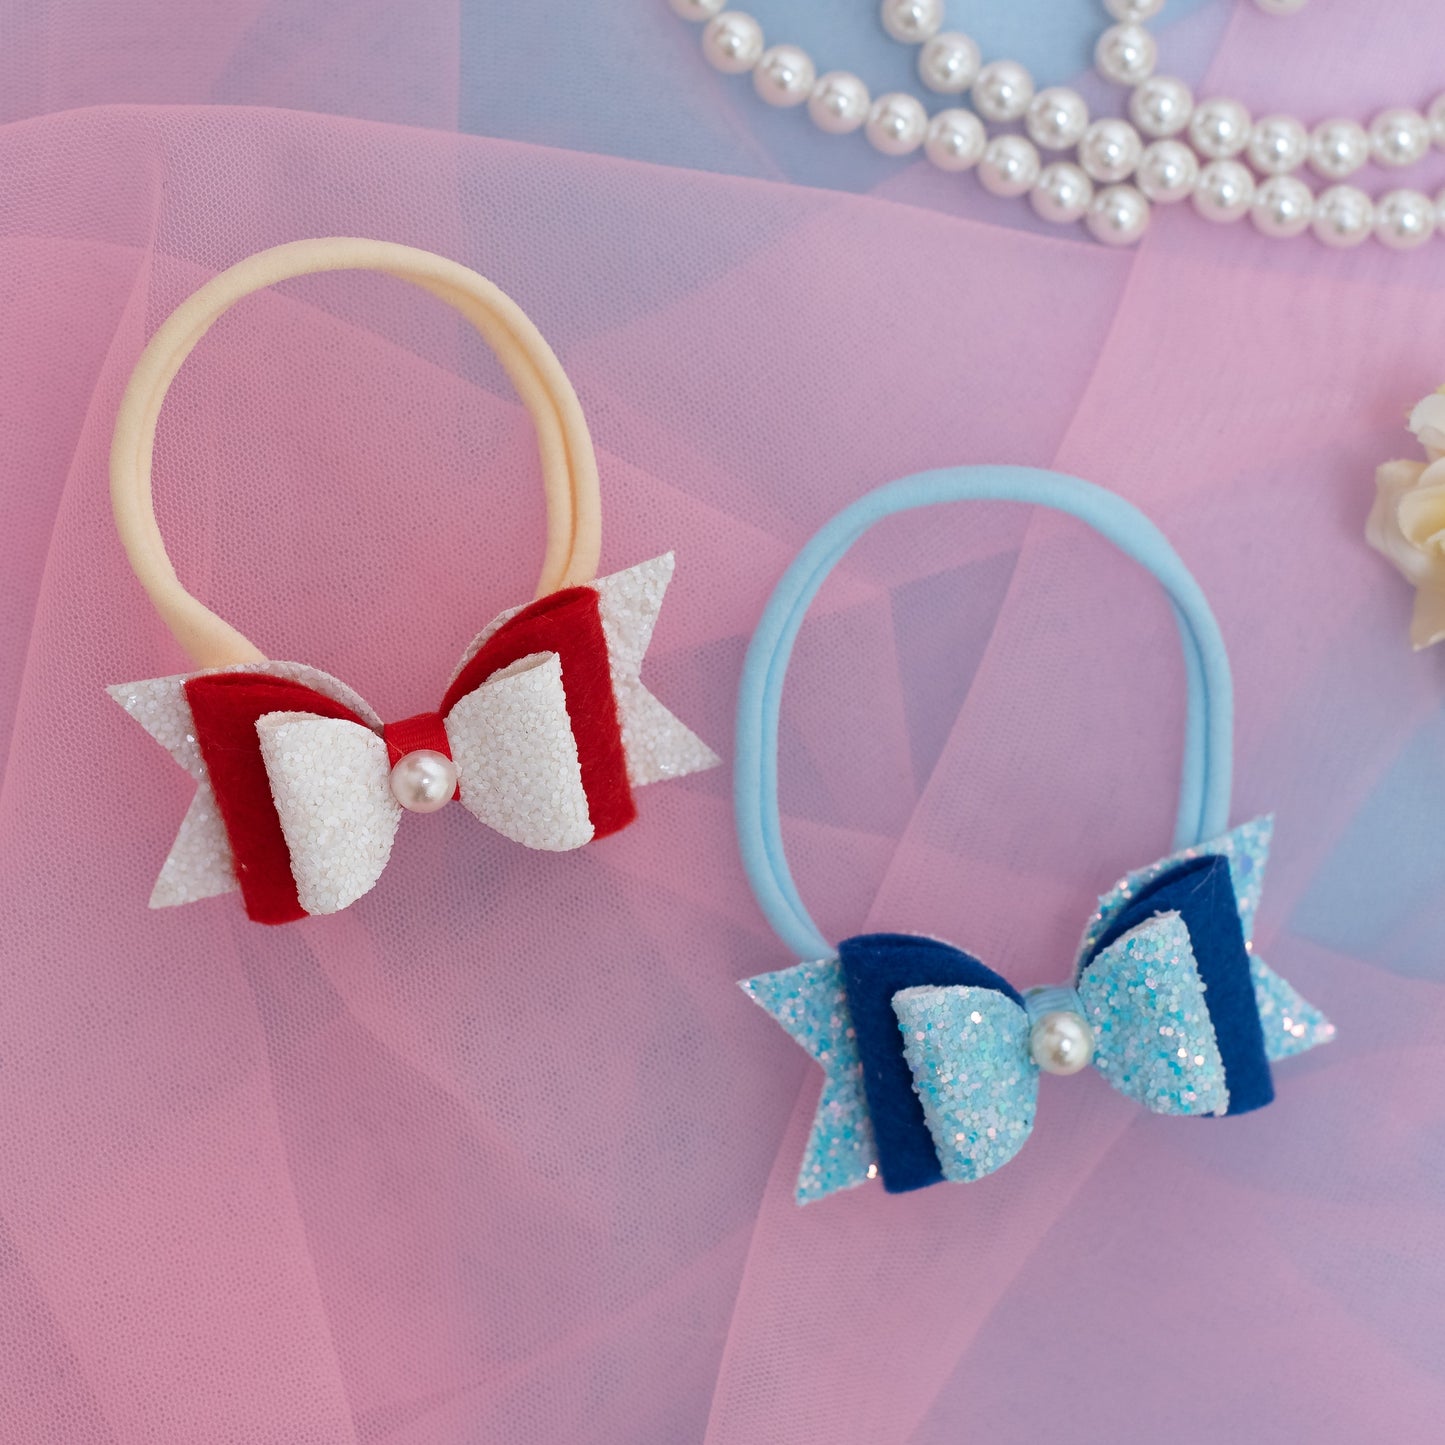 Combo: 2 Super Soft Infant Stretchy Bands with Glitter Bows on each - Red, Blue